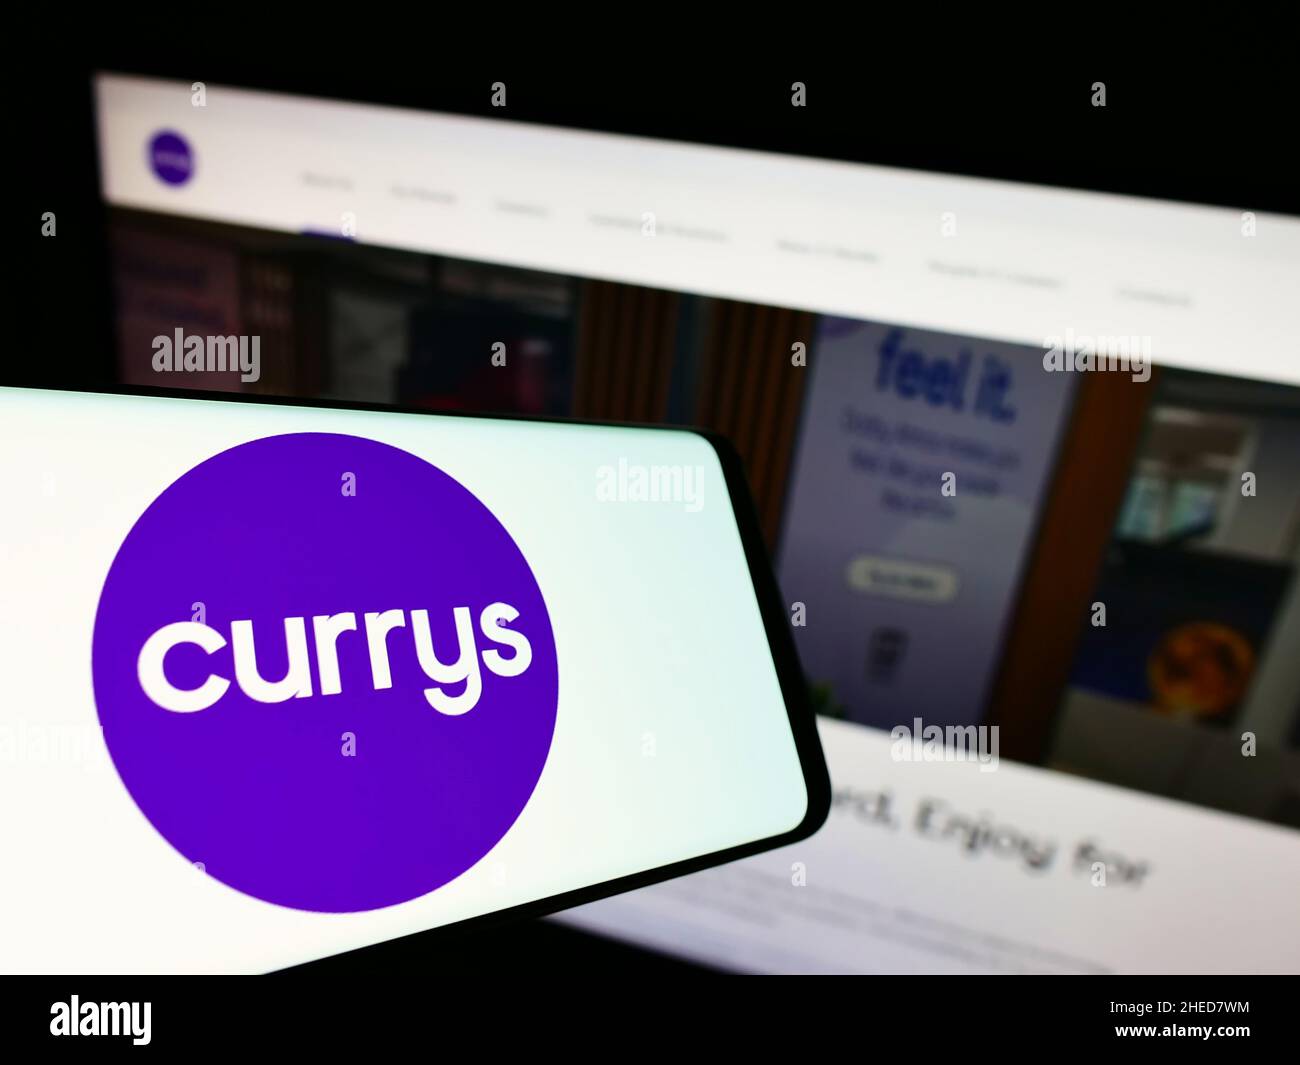 Smartphone with logo of British electronics retail company Currys plc on screen in front of website. Focus on center-right of phone display. Stock Photo